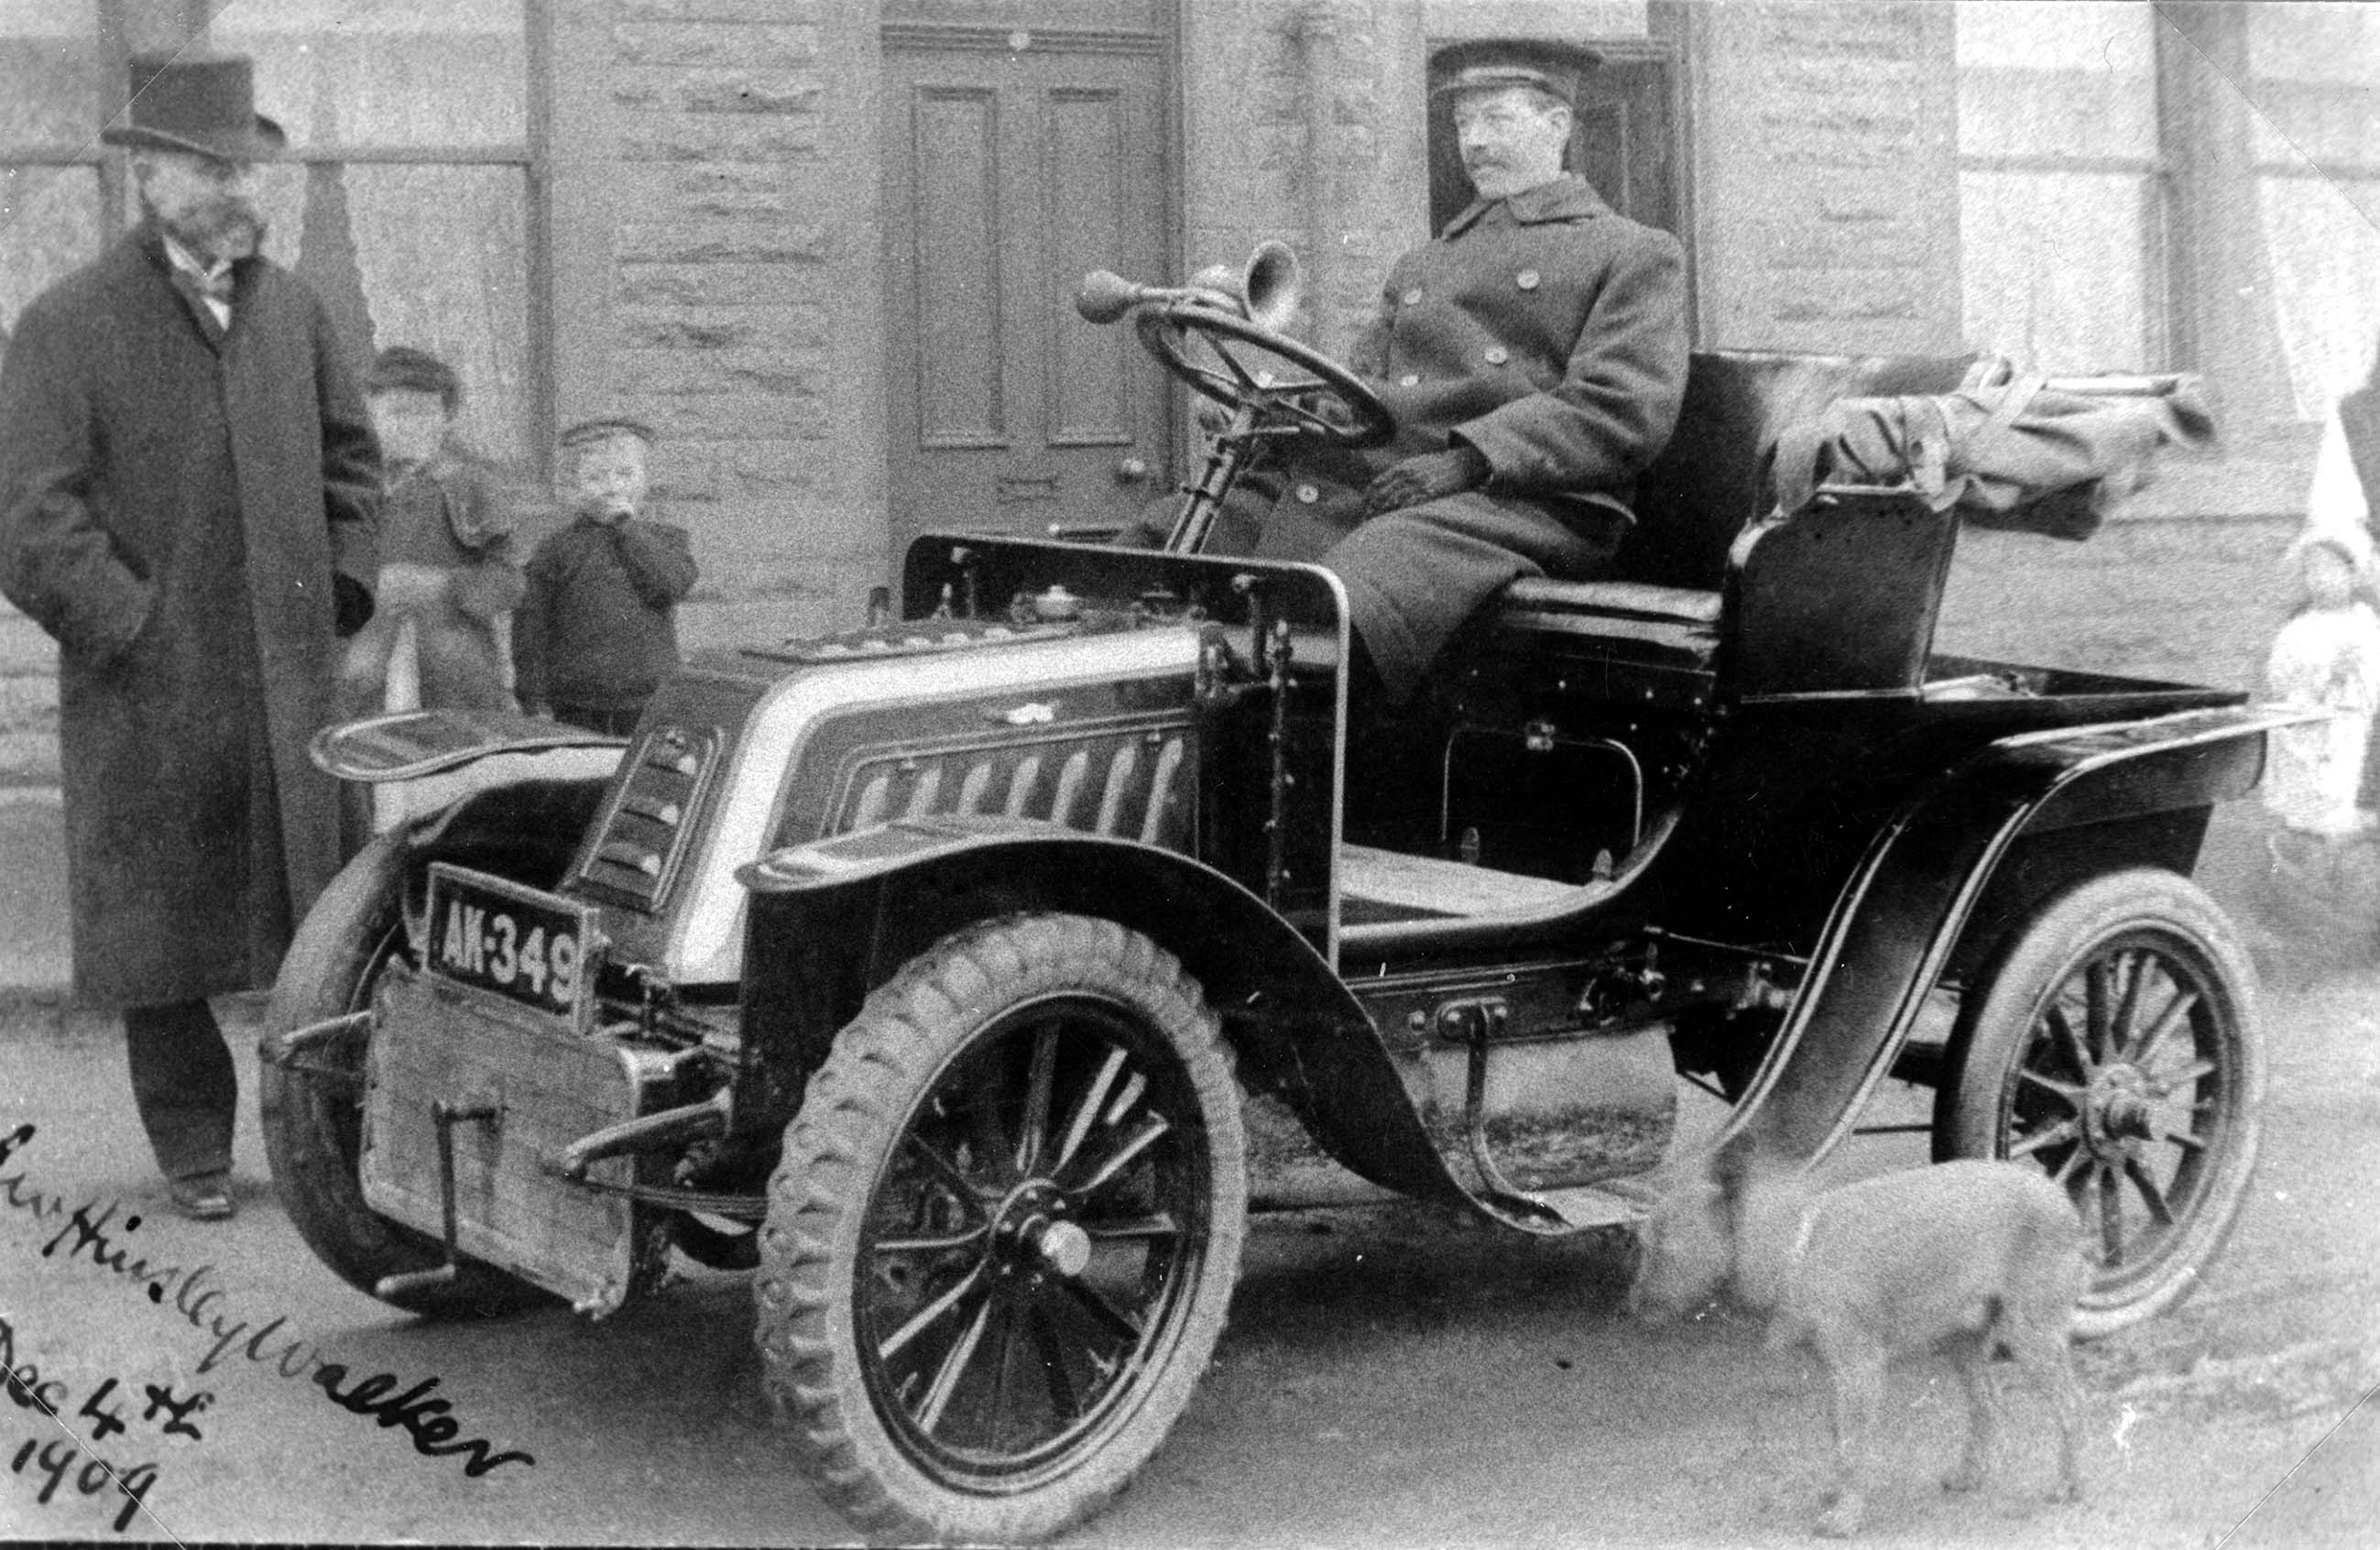 Dr Hinsley Walker standing beside his chauffeur driven car in Harrogate, in December 1909. From the Bertram Unné photographic collection.